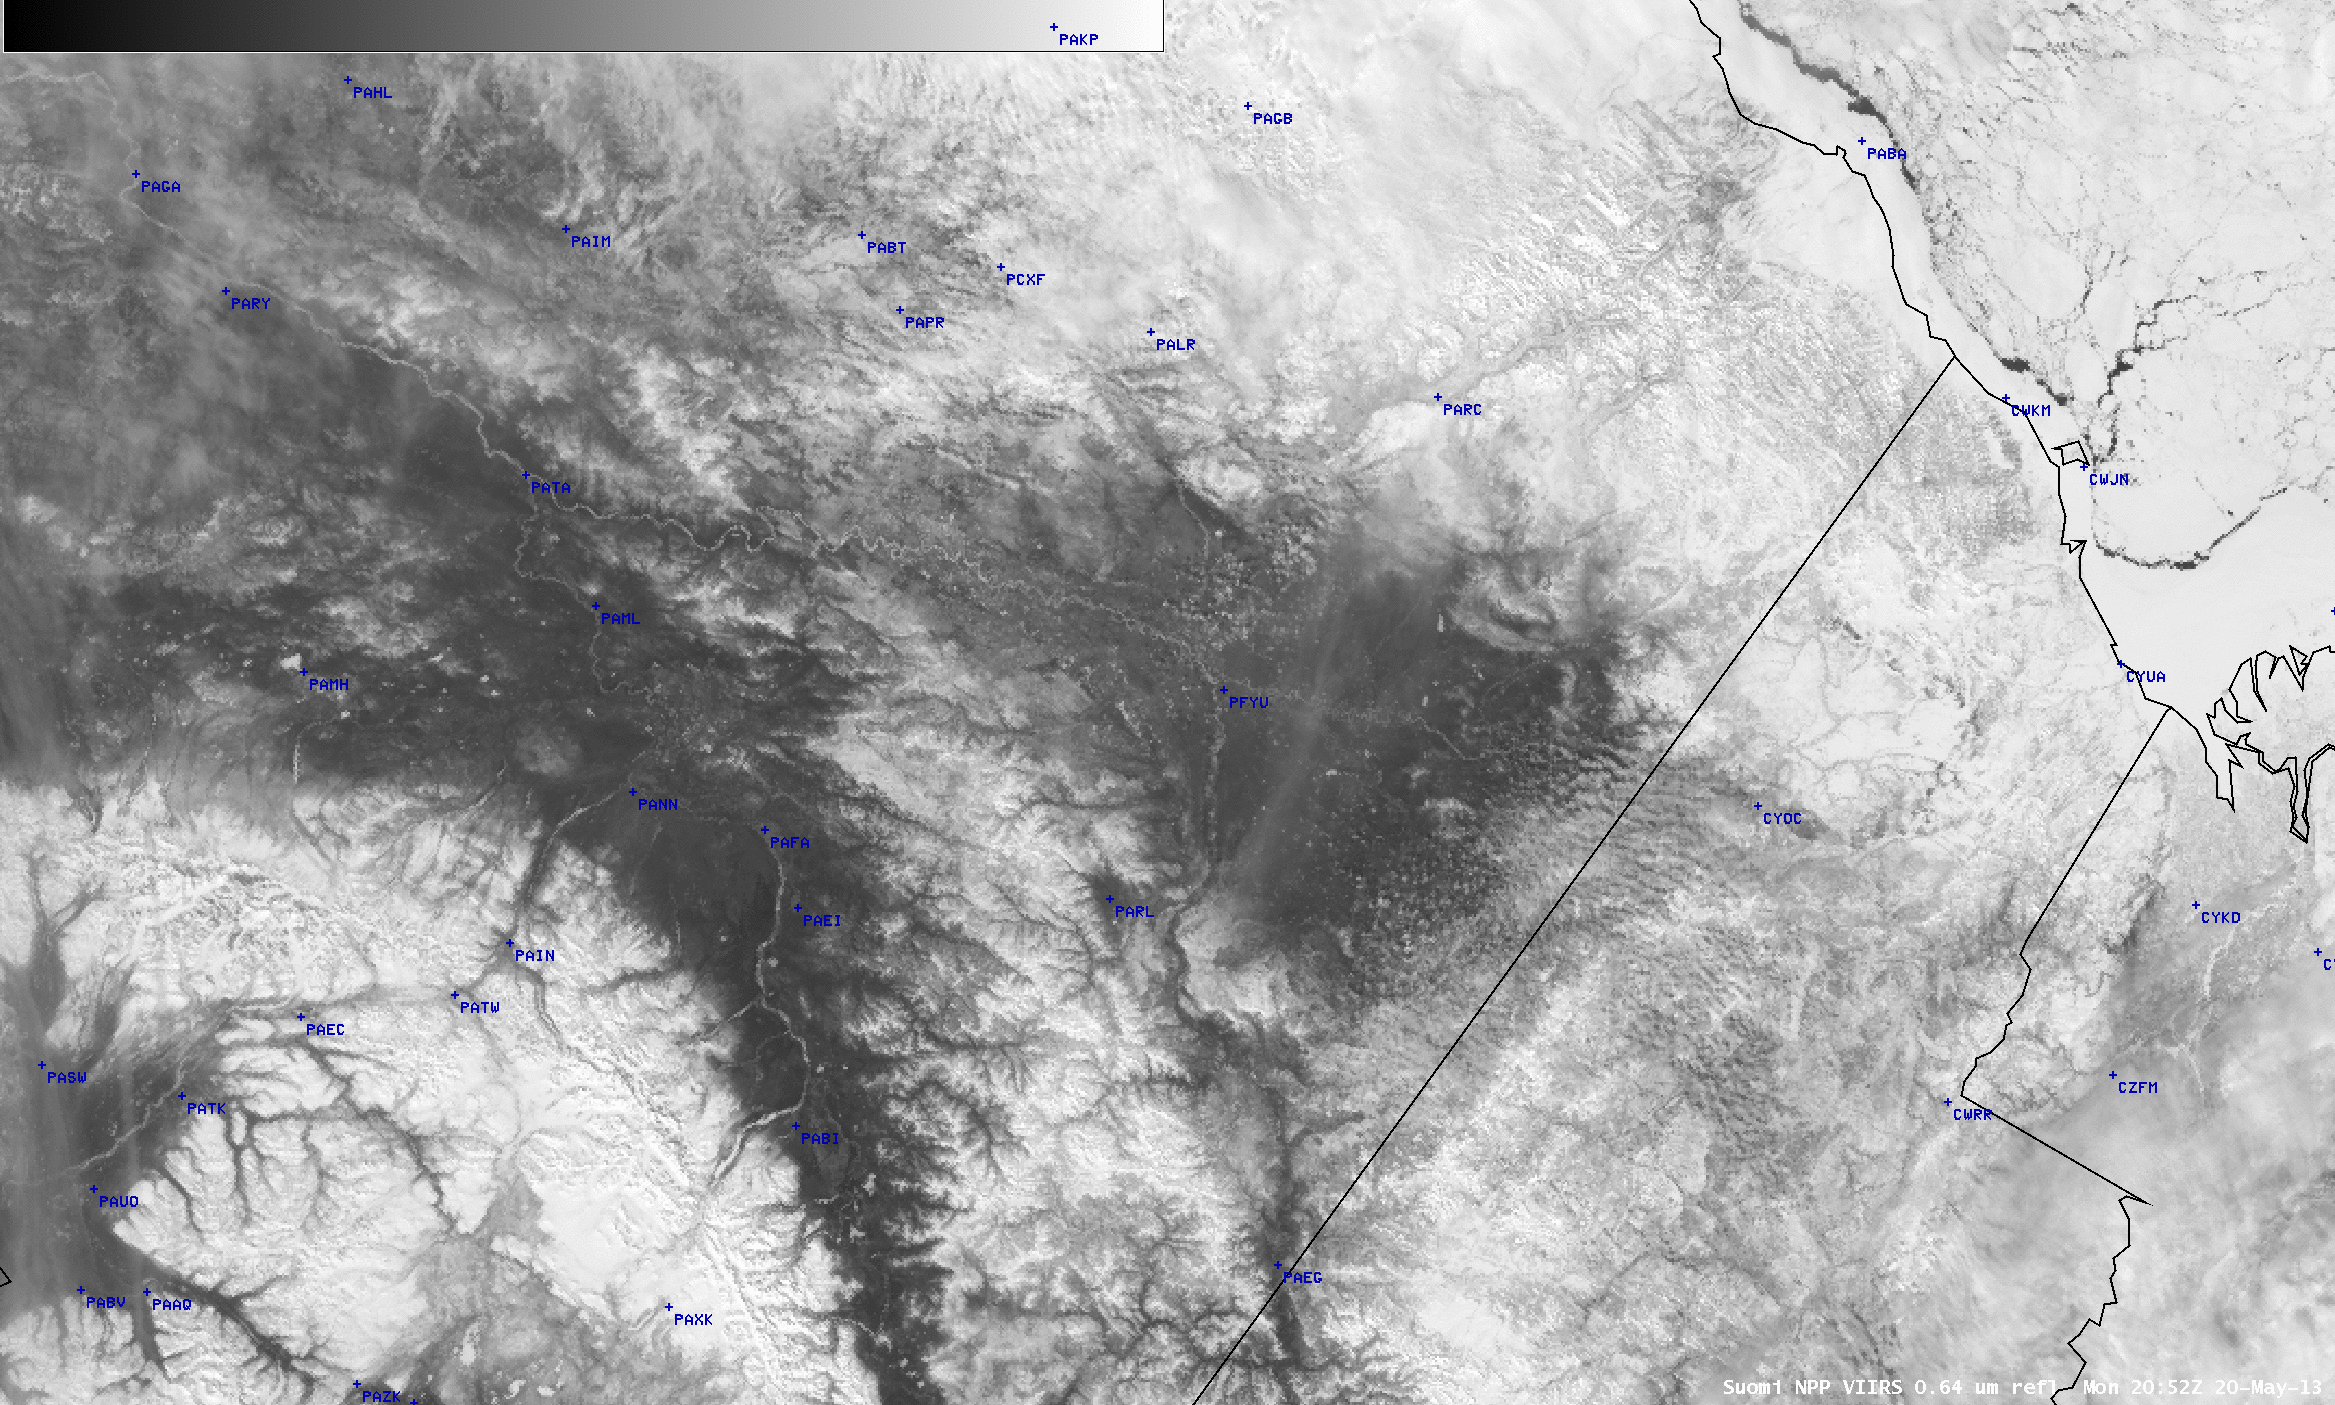 Suomi NPP VIIRS 0.64 Âµm visible channel, 0.86 Âµm "land/water" channel, and 1.61 Âµm "snow/ice channel" images